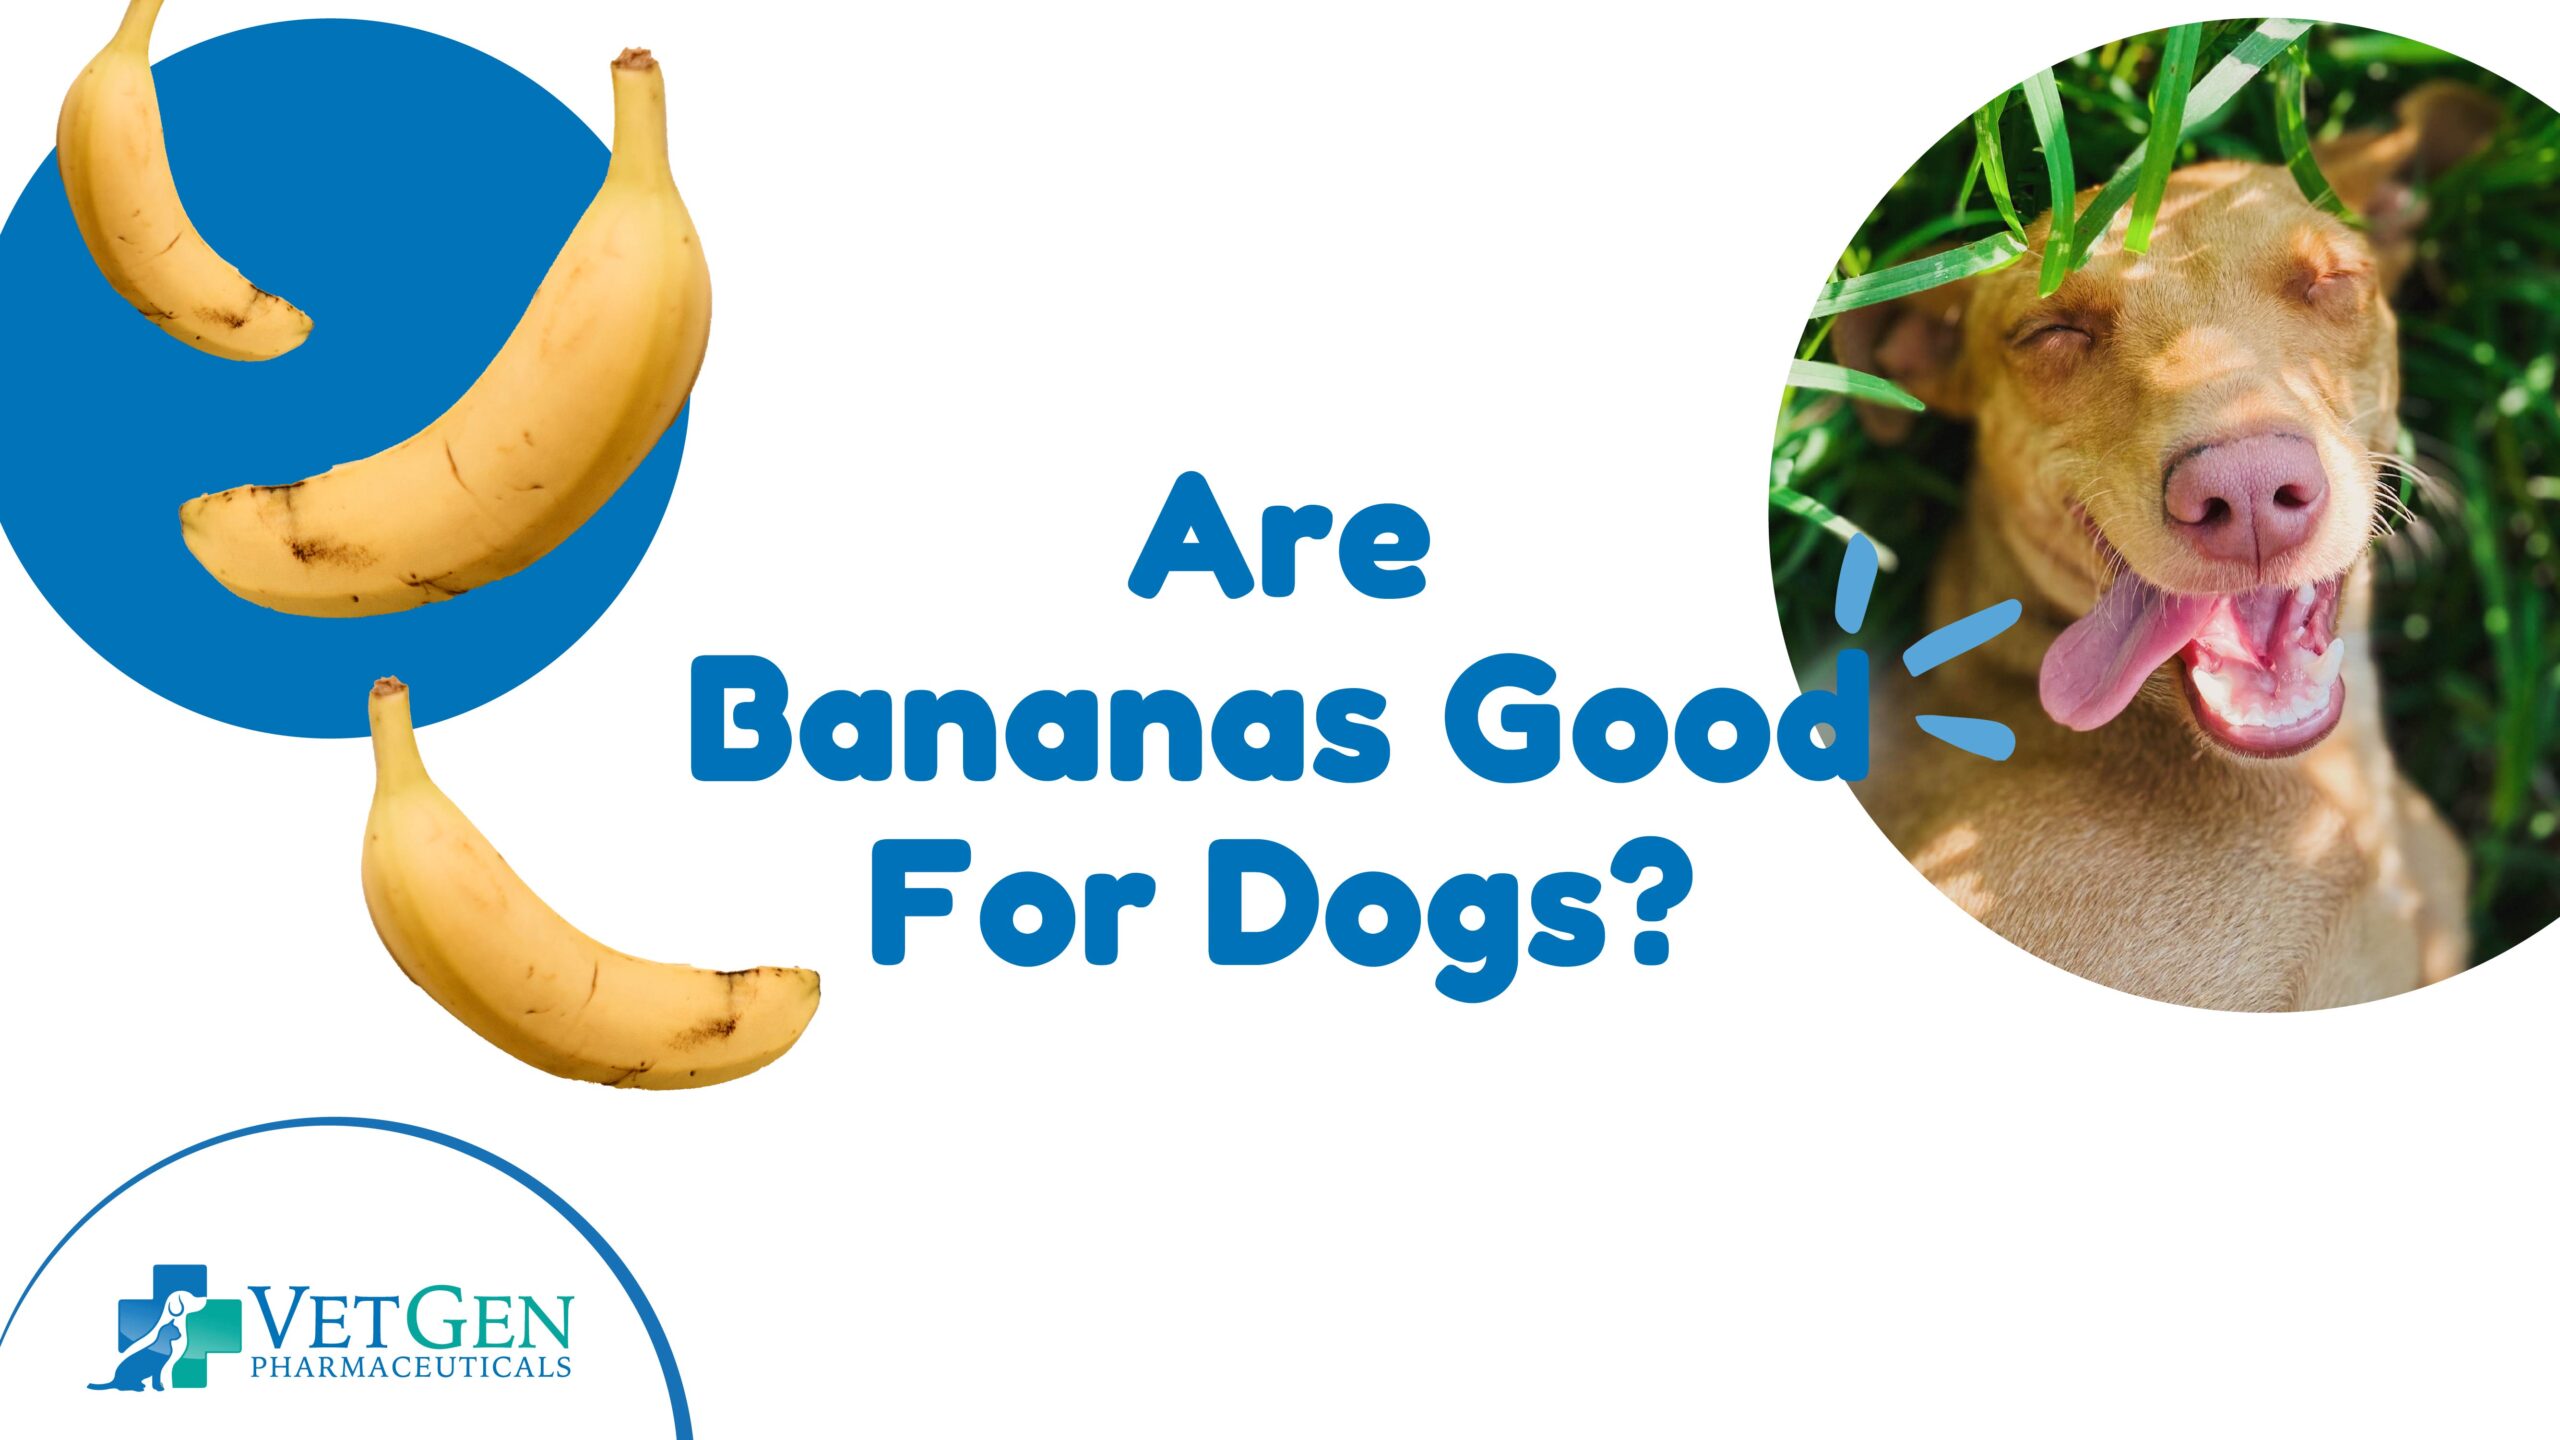 Are Bananas Good For Dogs